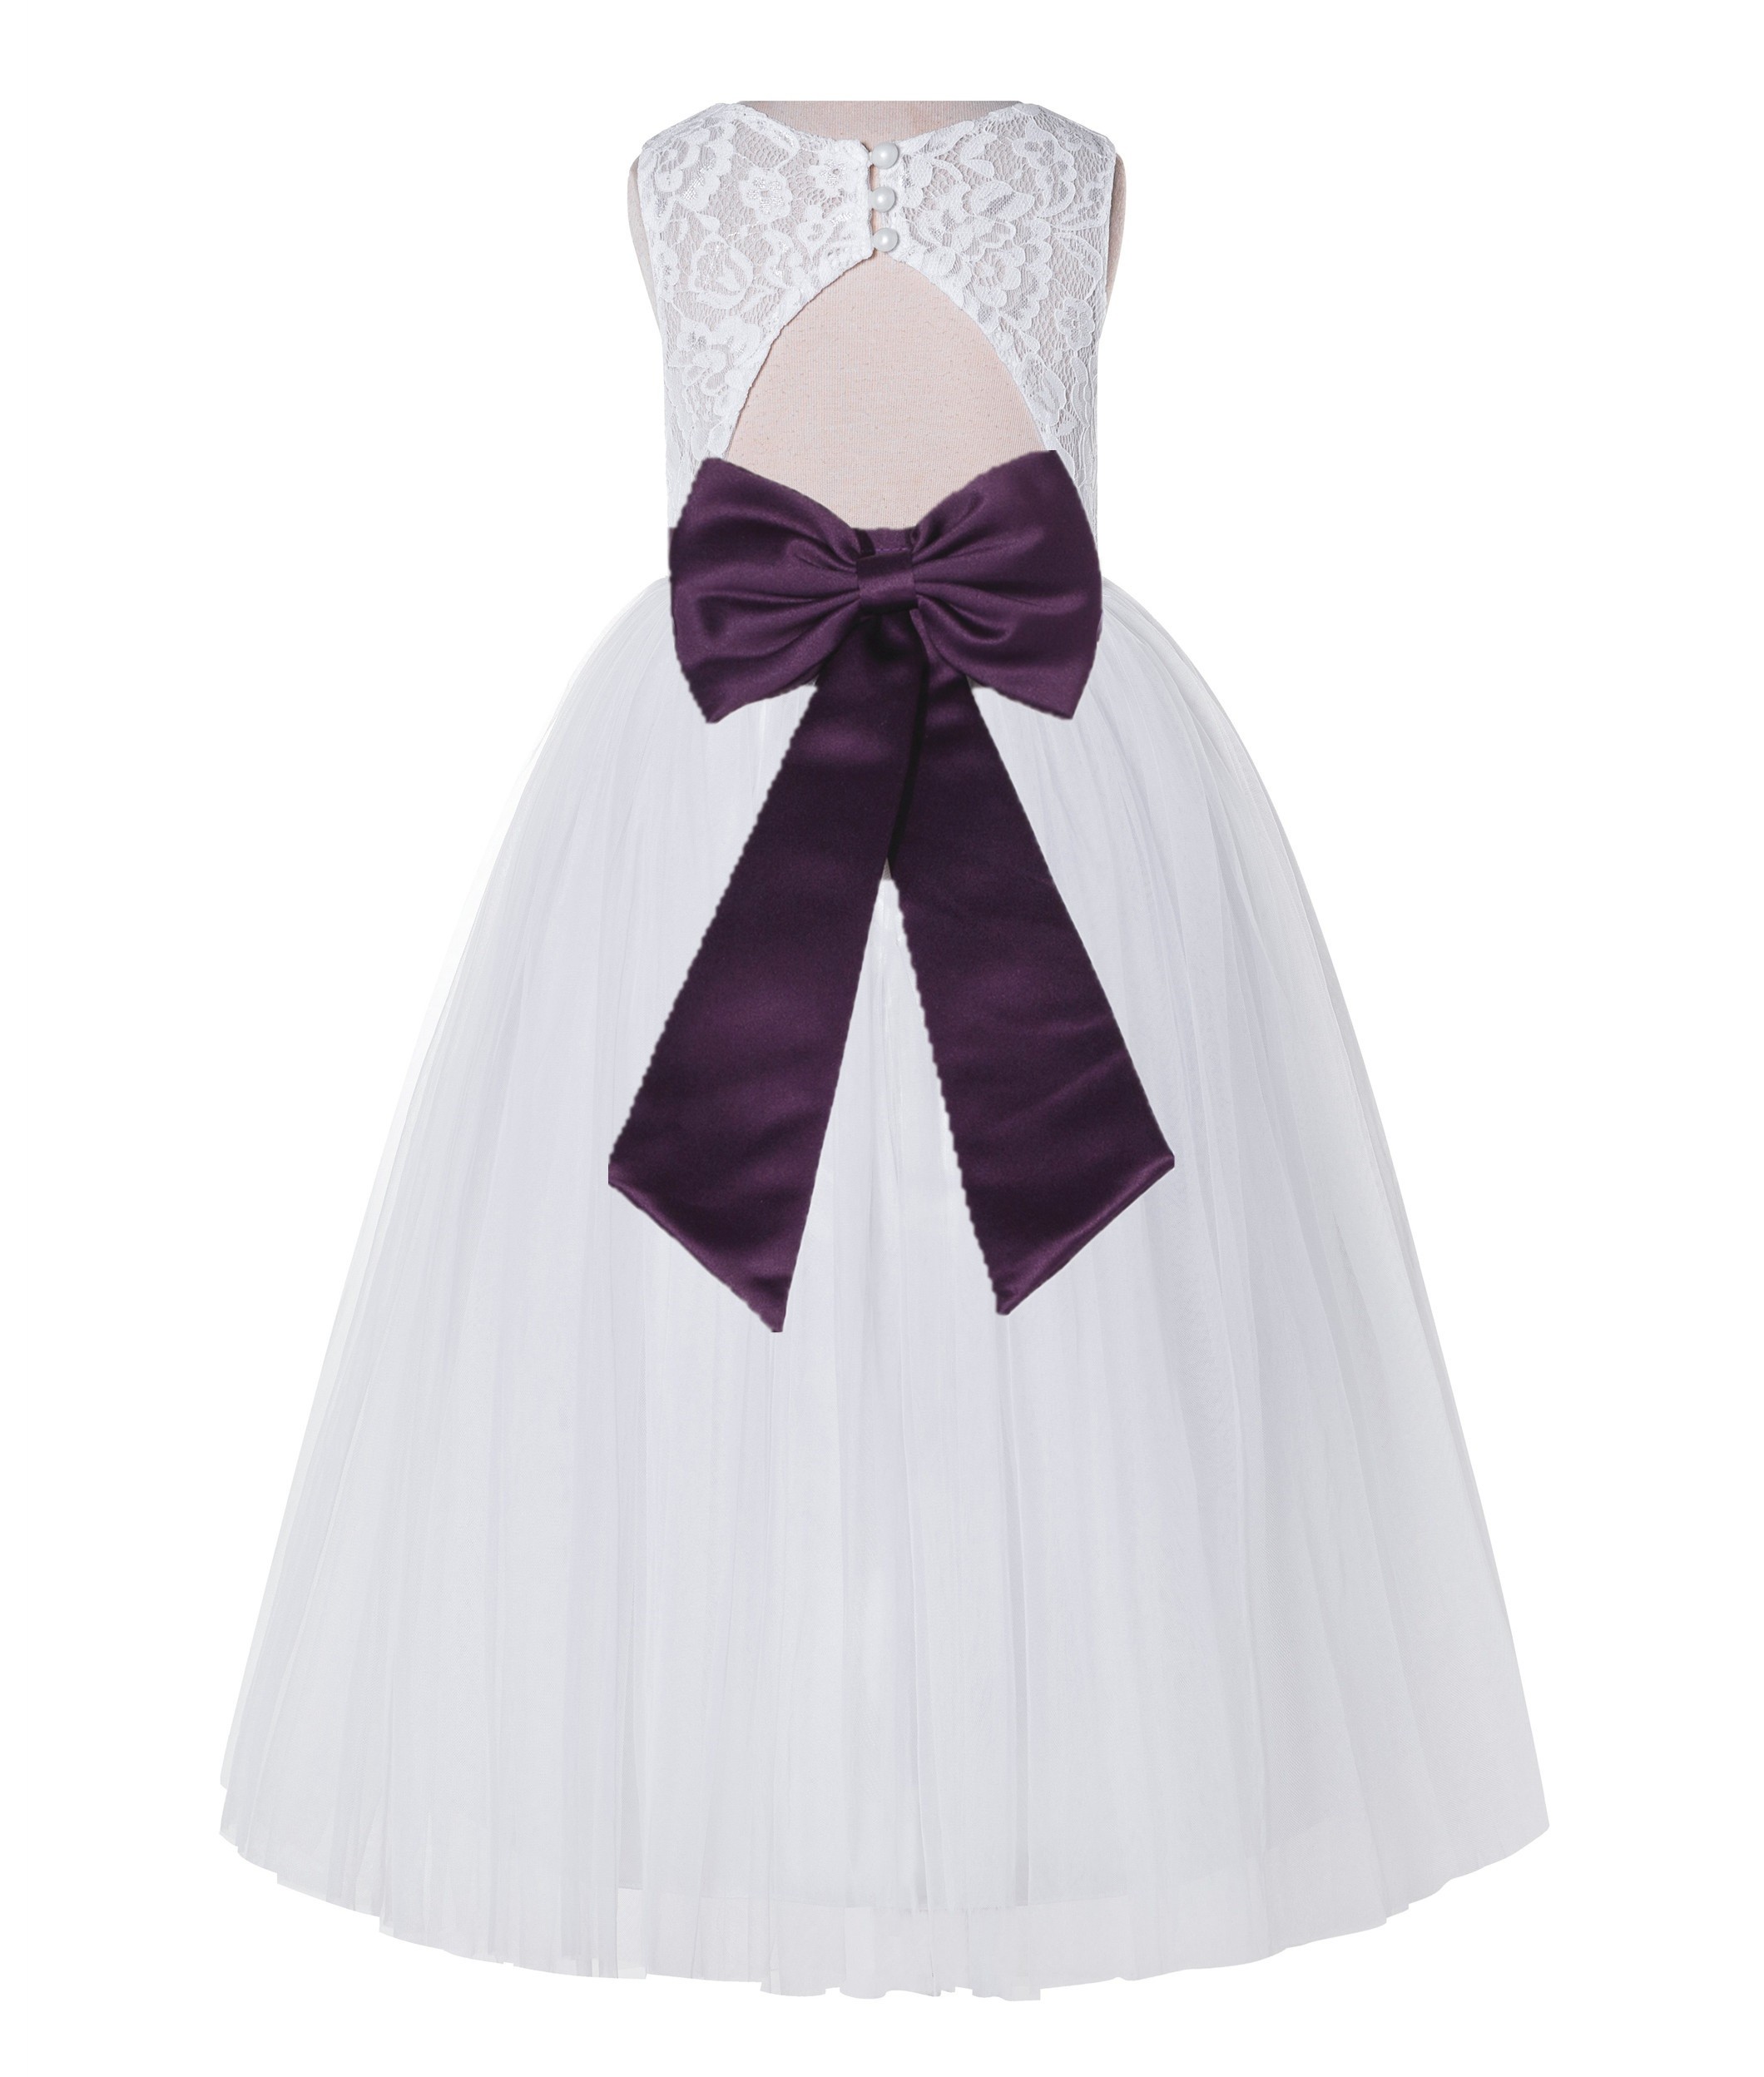 White / Plum Lace Tulle Scoop Neck Keyhole Back A-Line Flower Girl Dress 178